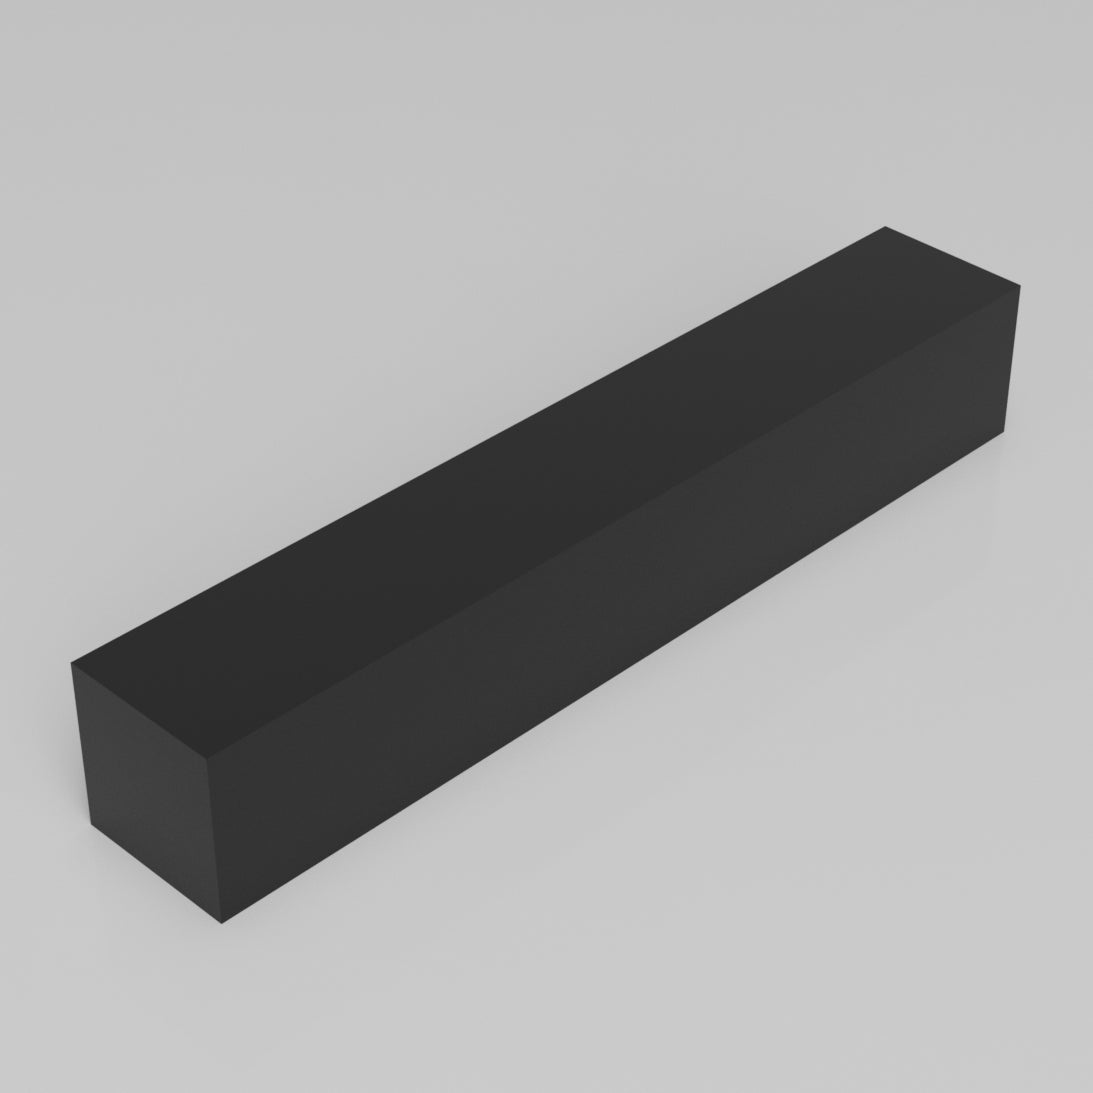 Machinable Wax Rectangular Block Front View 2 Inch by 2 Inch by 12 Inch